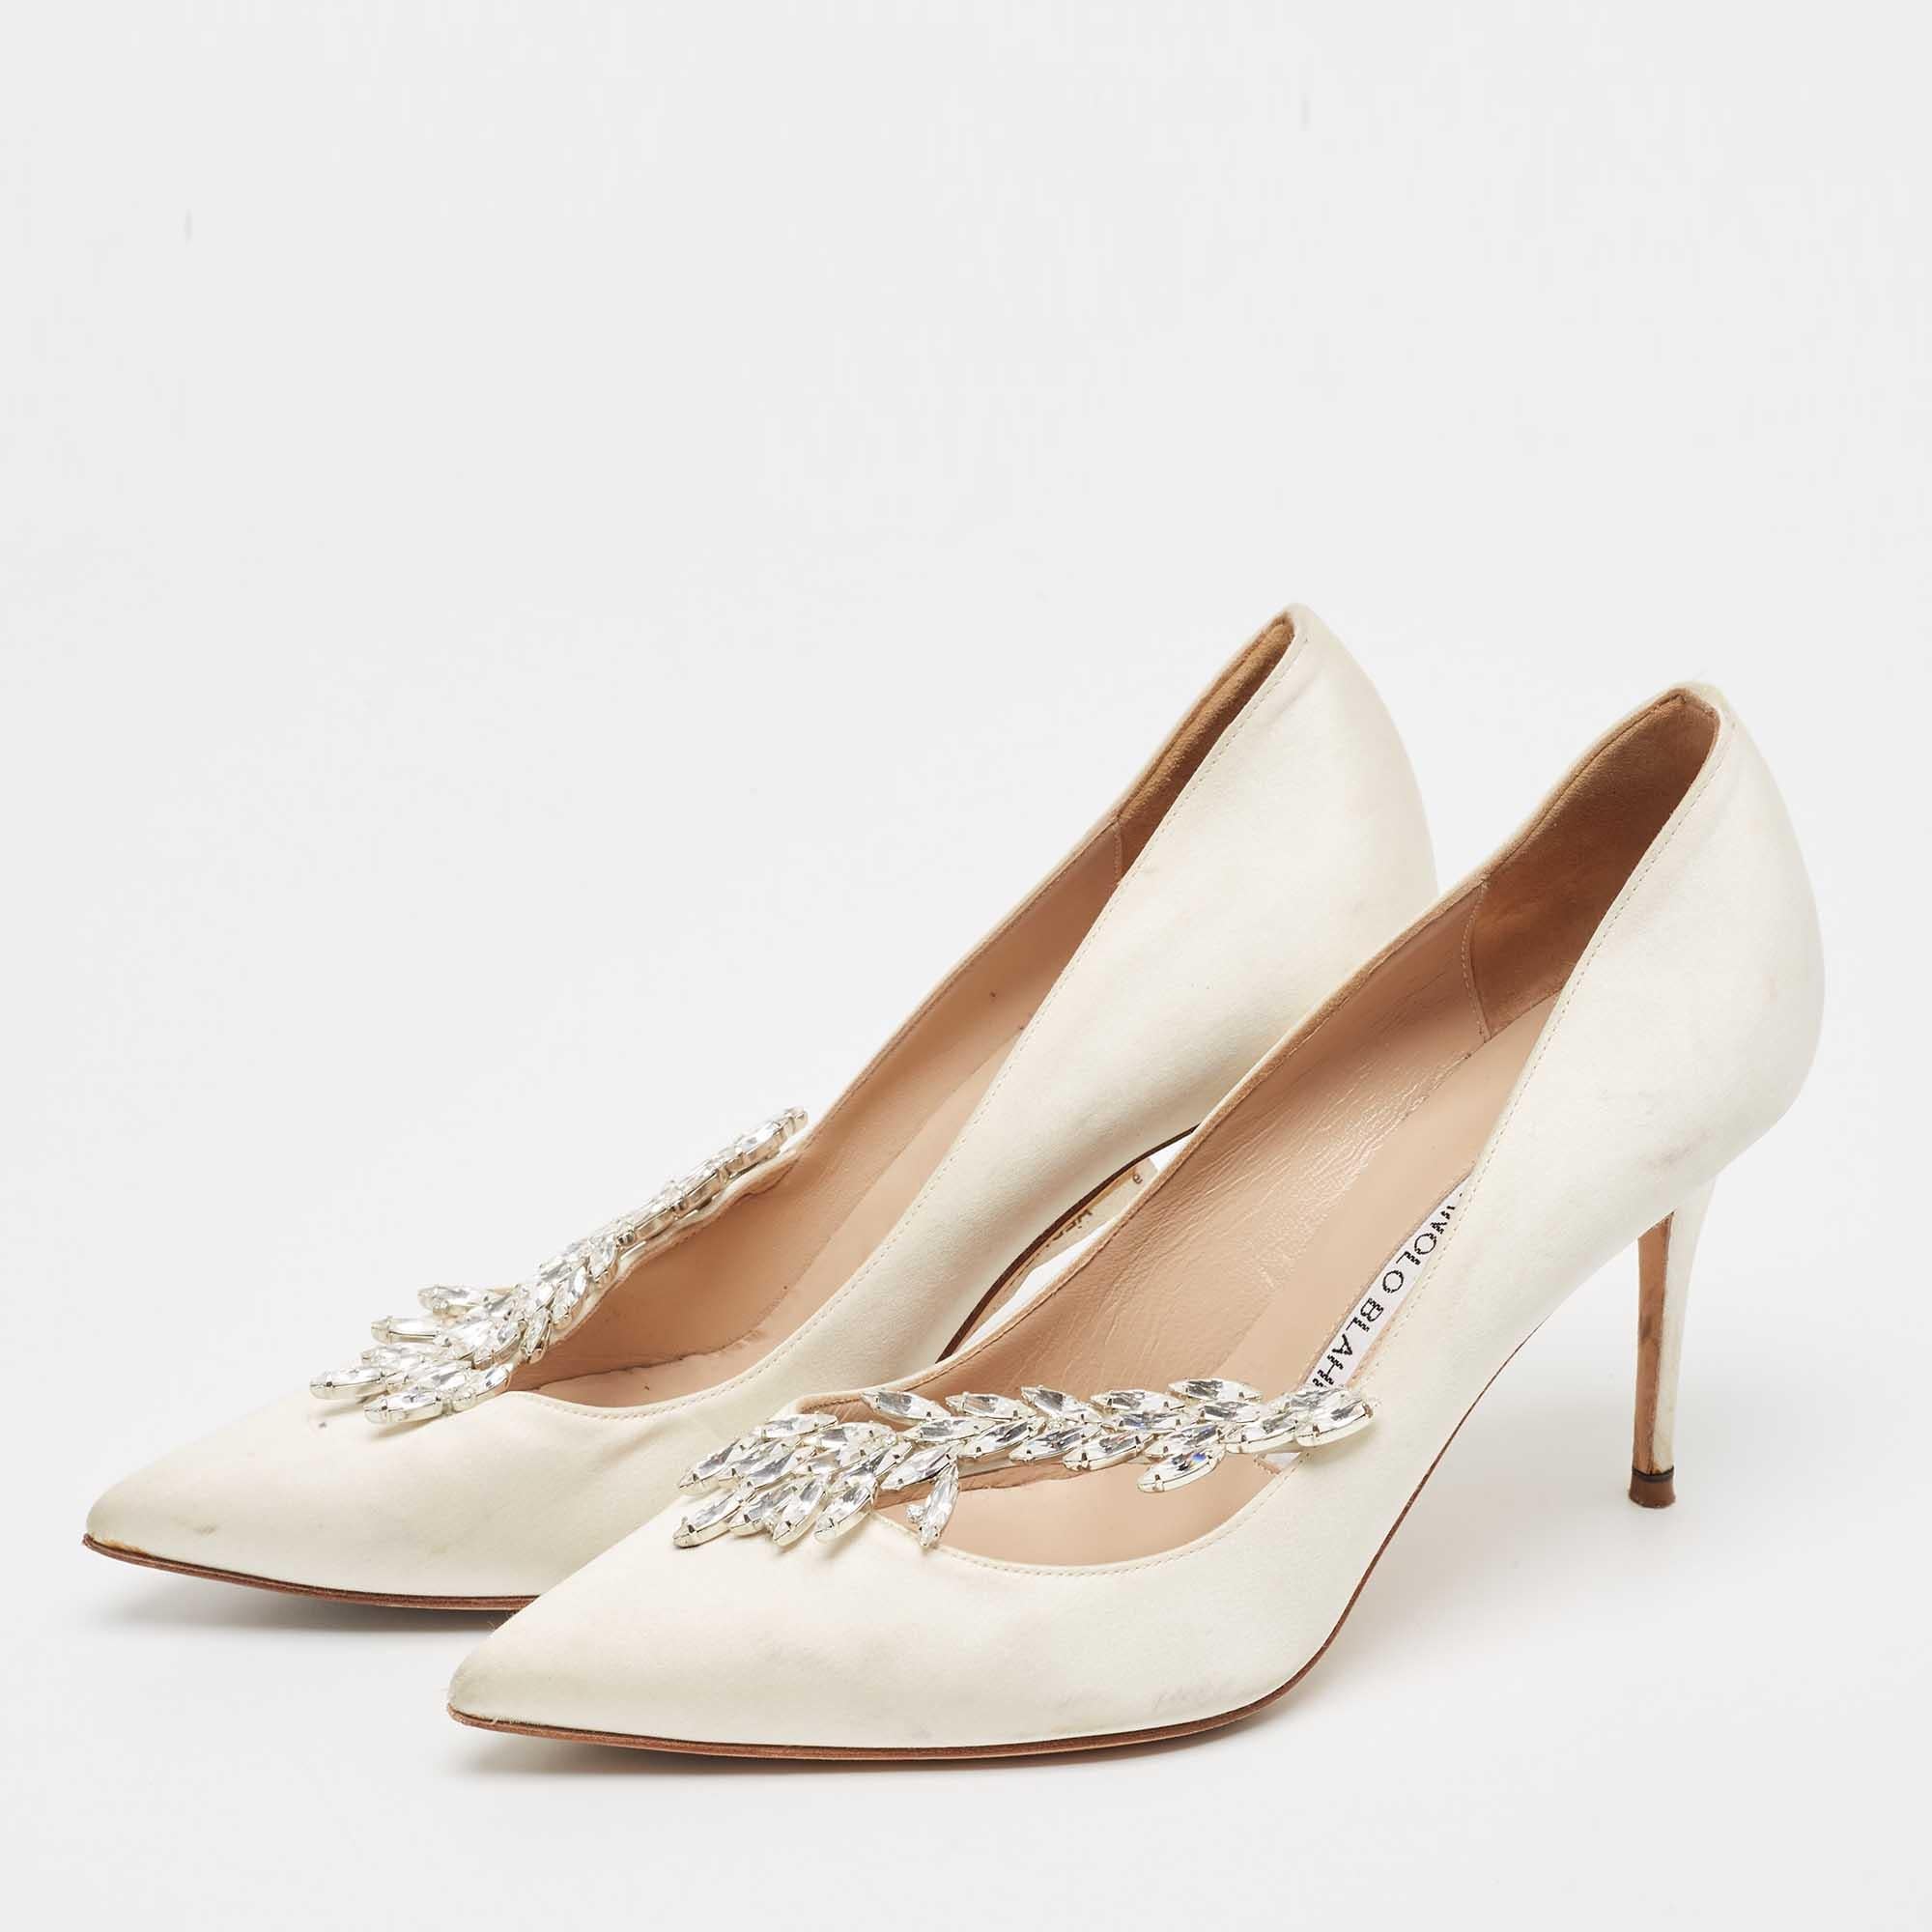 Allow this grand pair of pumps by Manolo Blahnik to elevate your look. Crafted with satin, they are adorned with eye-catching Nadira embellishments and profiles pointed toes. The leather-lined insoles carry brand labeling. This pair is elevated on